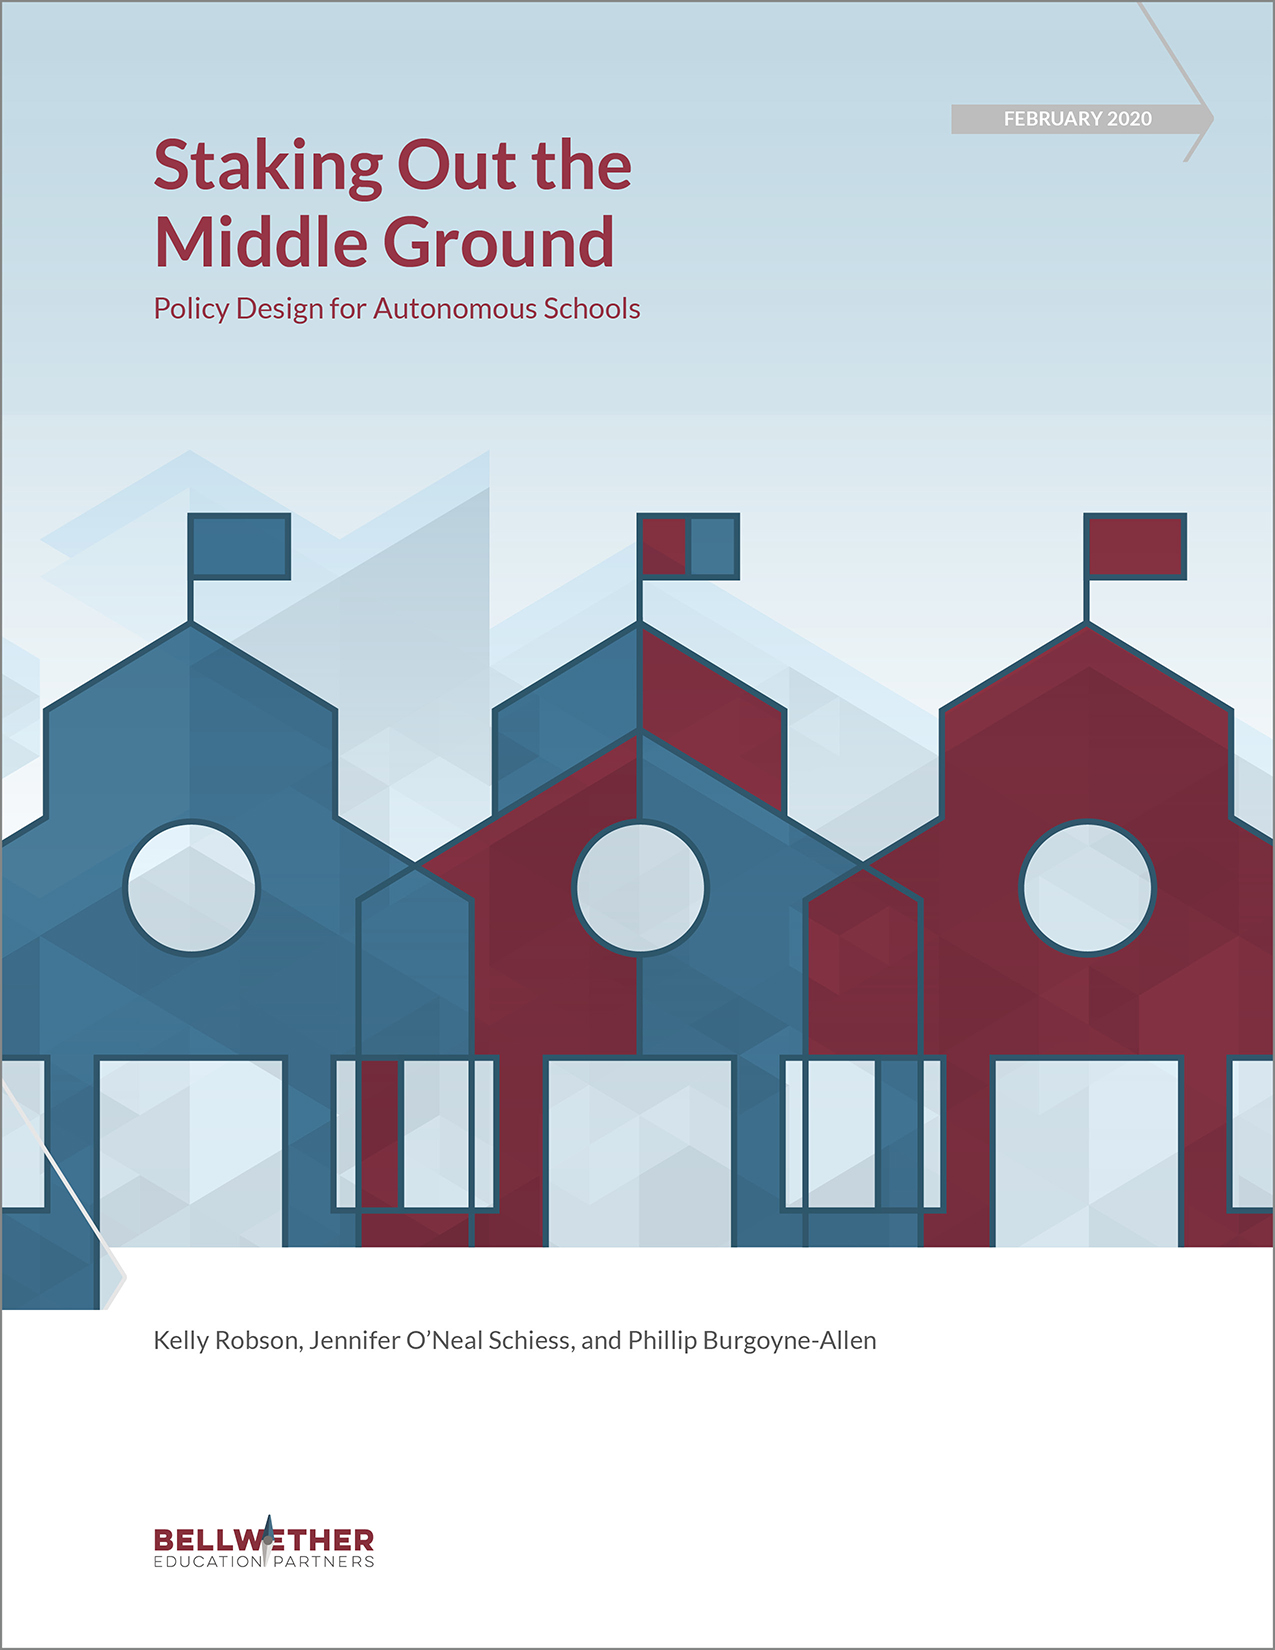 cover of Bellwether report "Staking out the Middle Ground: Policy Design for Autonomous Schools from Feb 2020, features graphic of three school buildings with different but overlapping colors